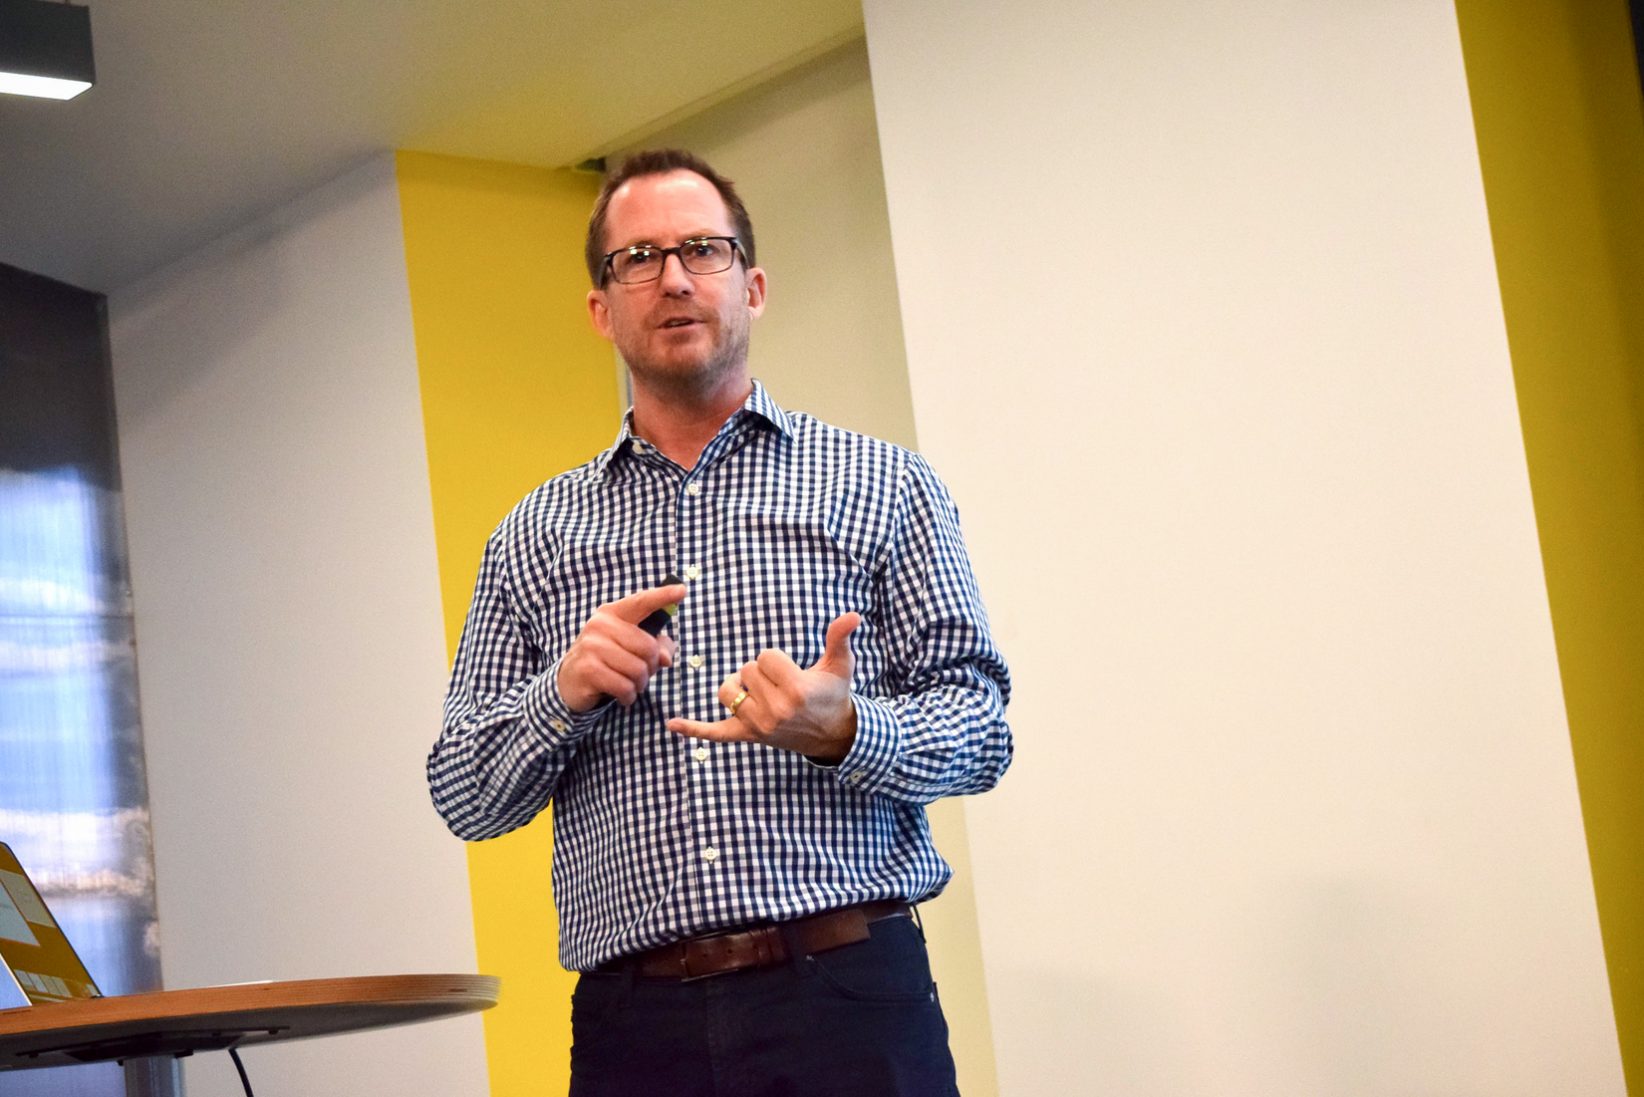 In KC visit, former Infusionsoft CMO delivers lessons on focus